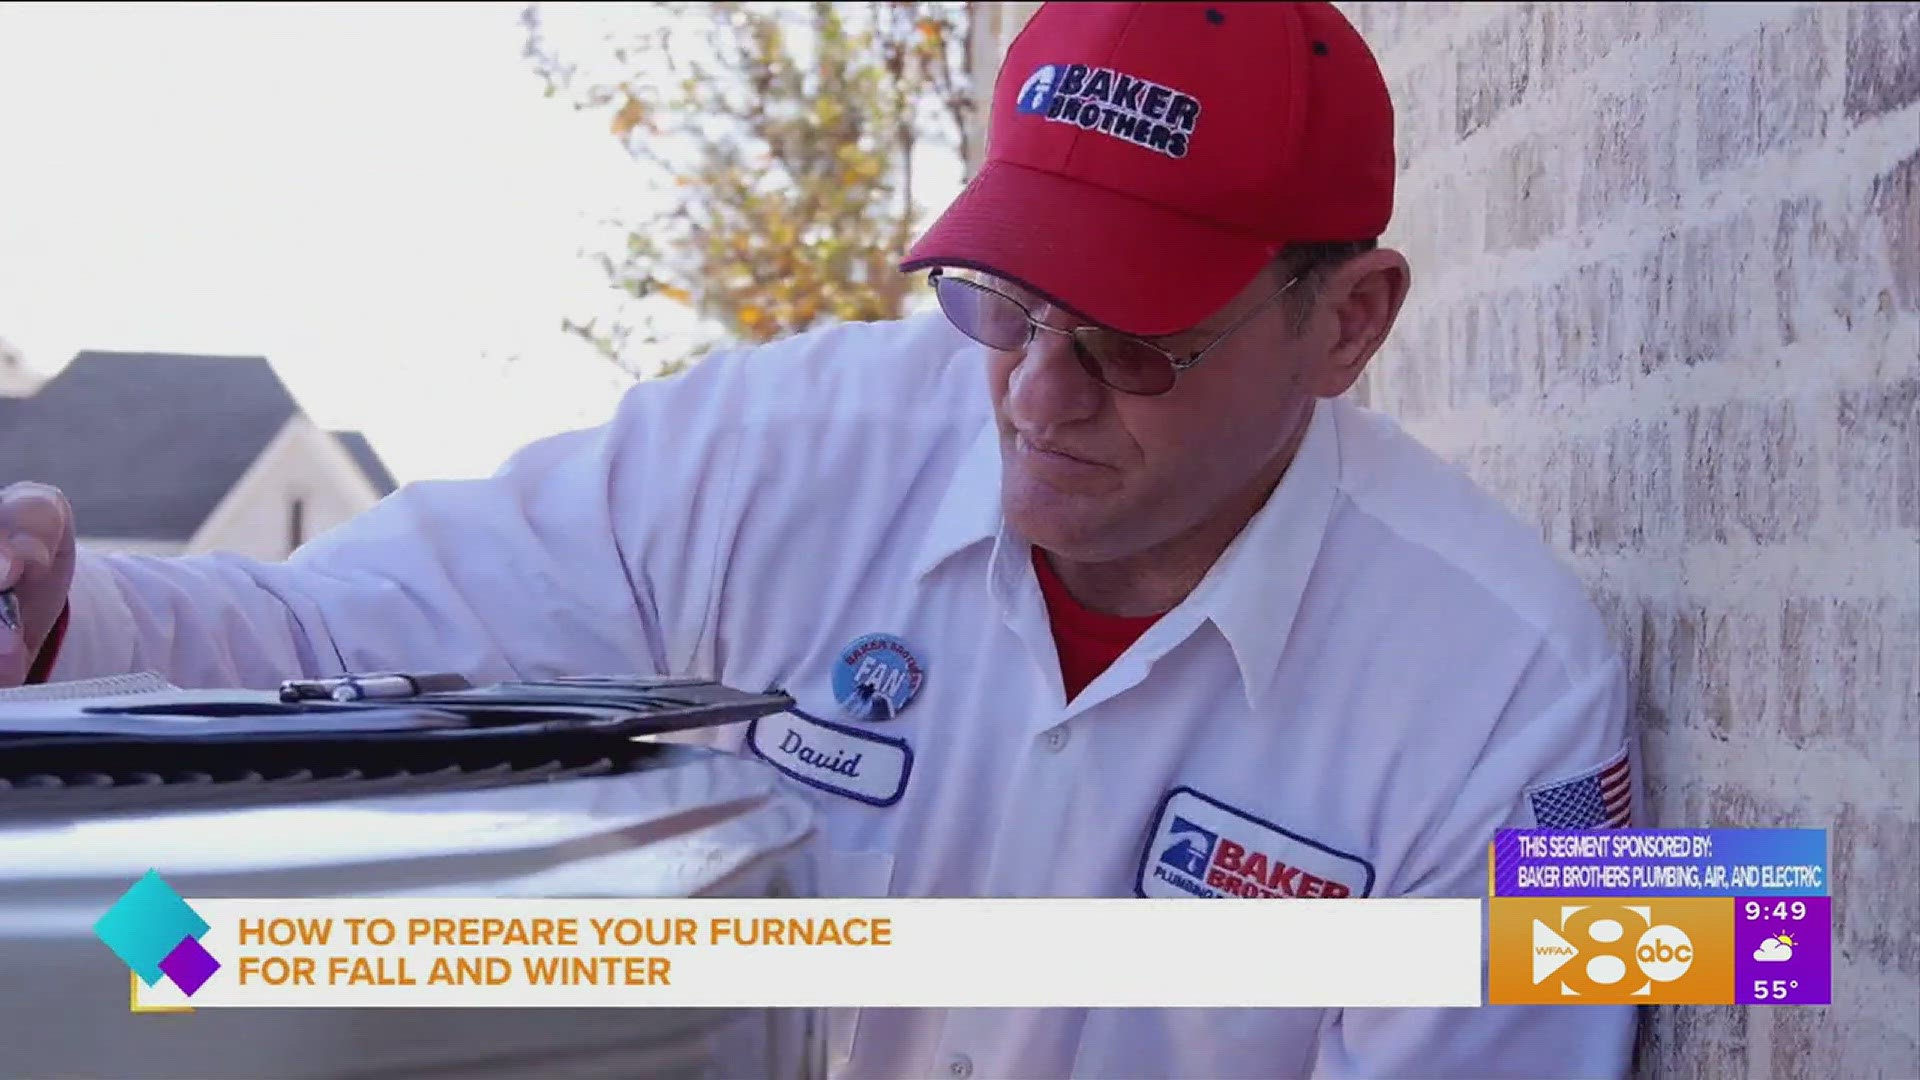 This segment is sponsored by Baker Brothers Plumbing, Air and Electric. Call 214.324.8811 or go to bakerbrothersplumbing.com for more information.